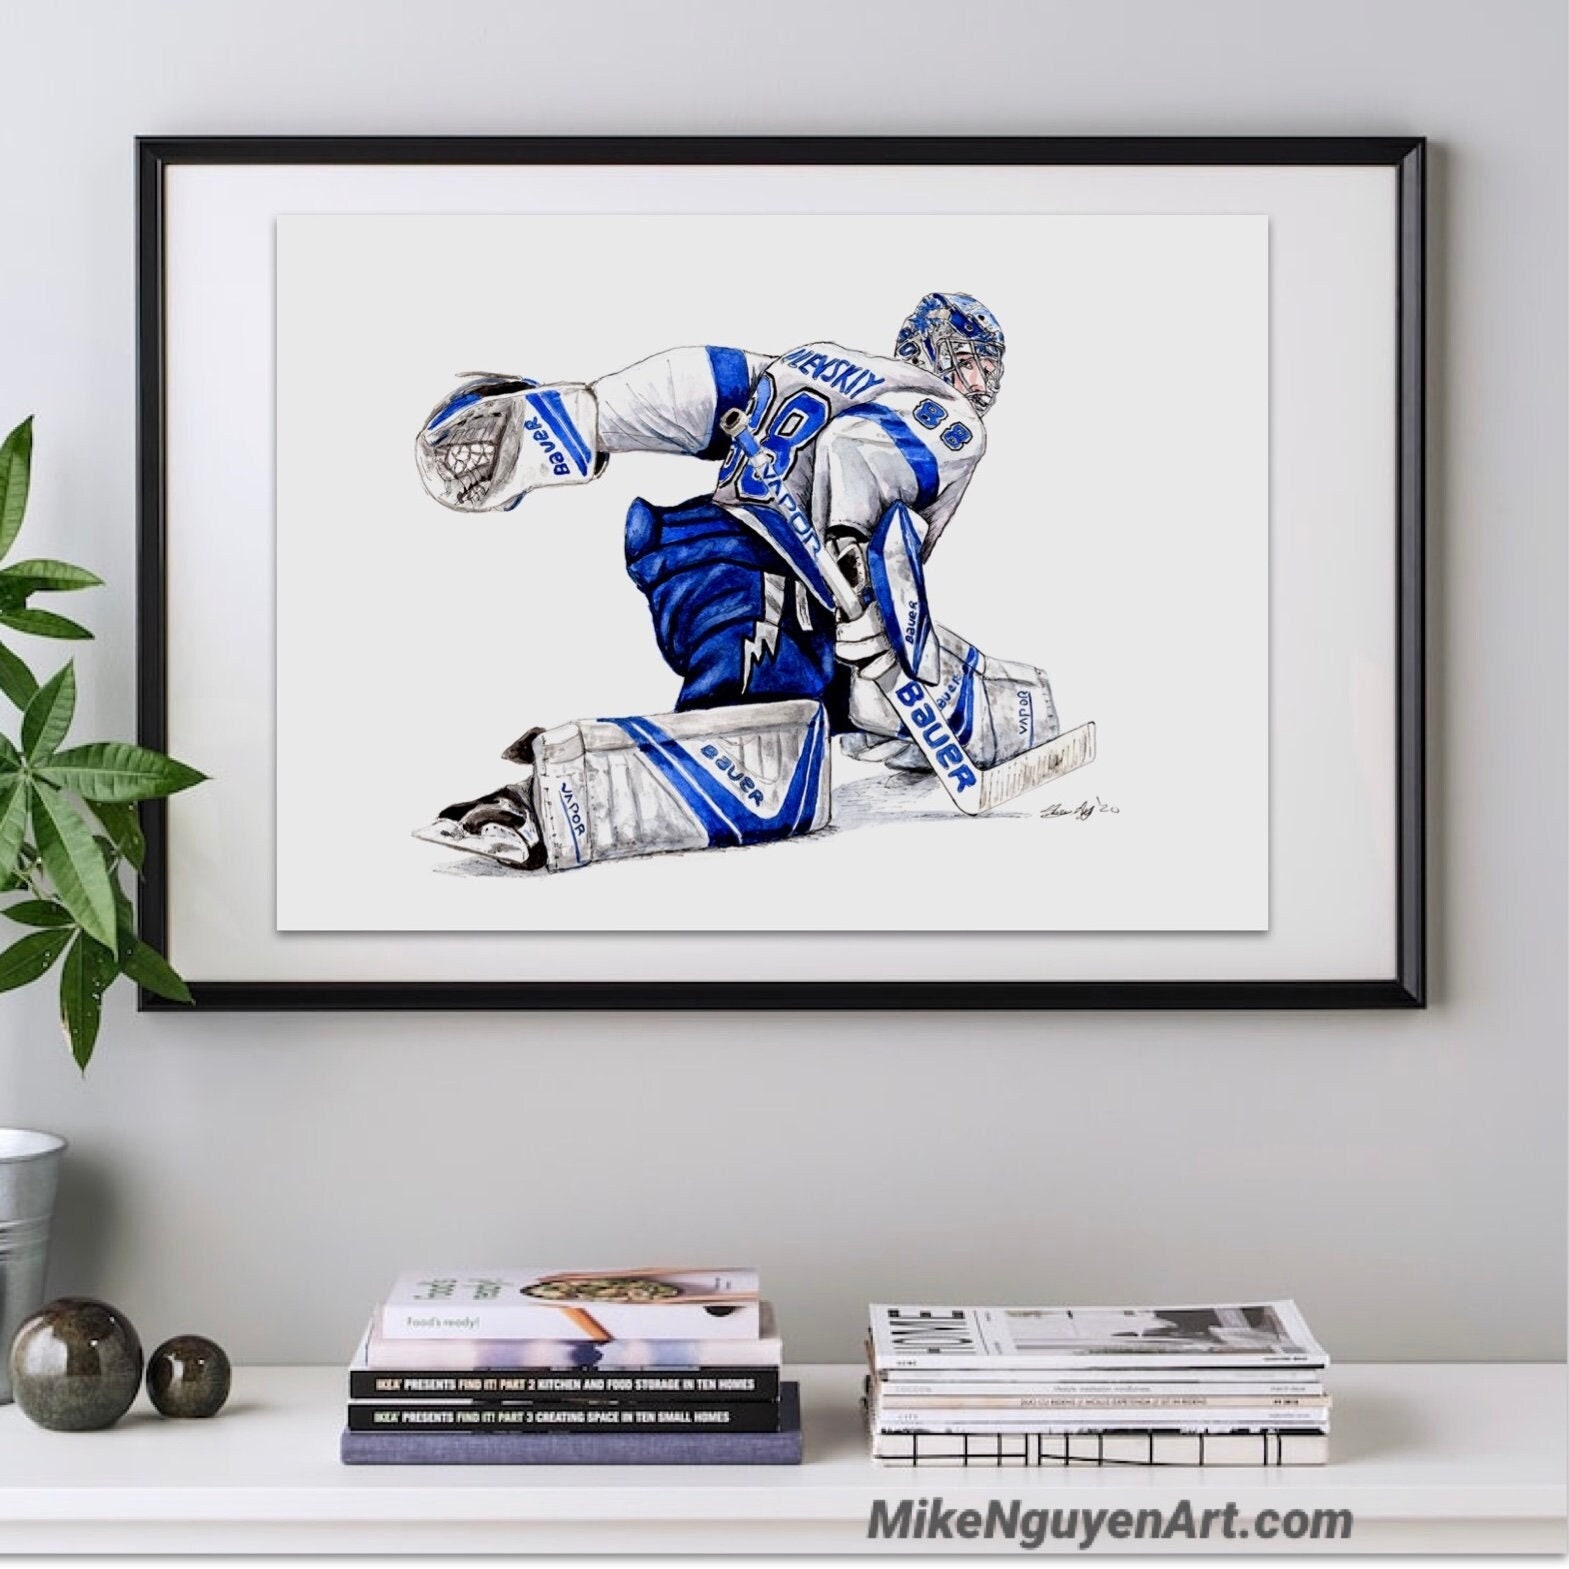 My Hand made drawing of Andrei Vasilevskiy. Rate it! : r/TampaBayLightning